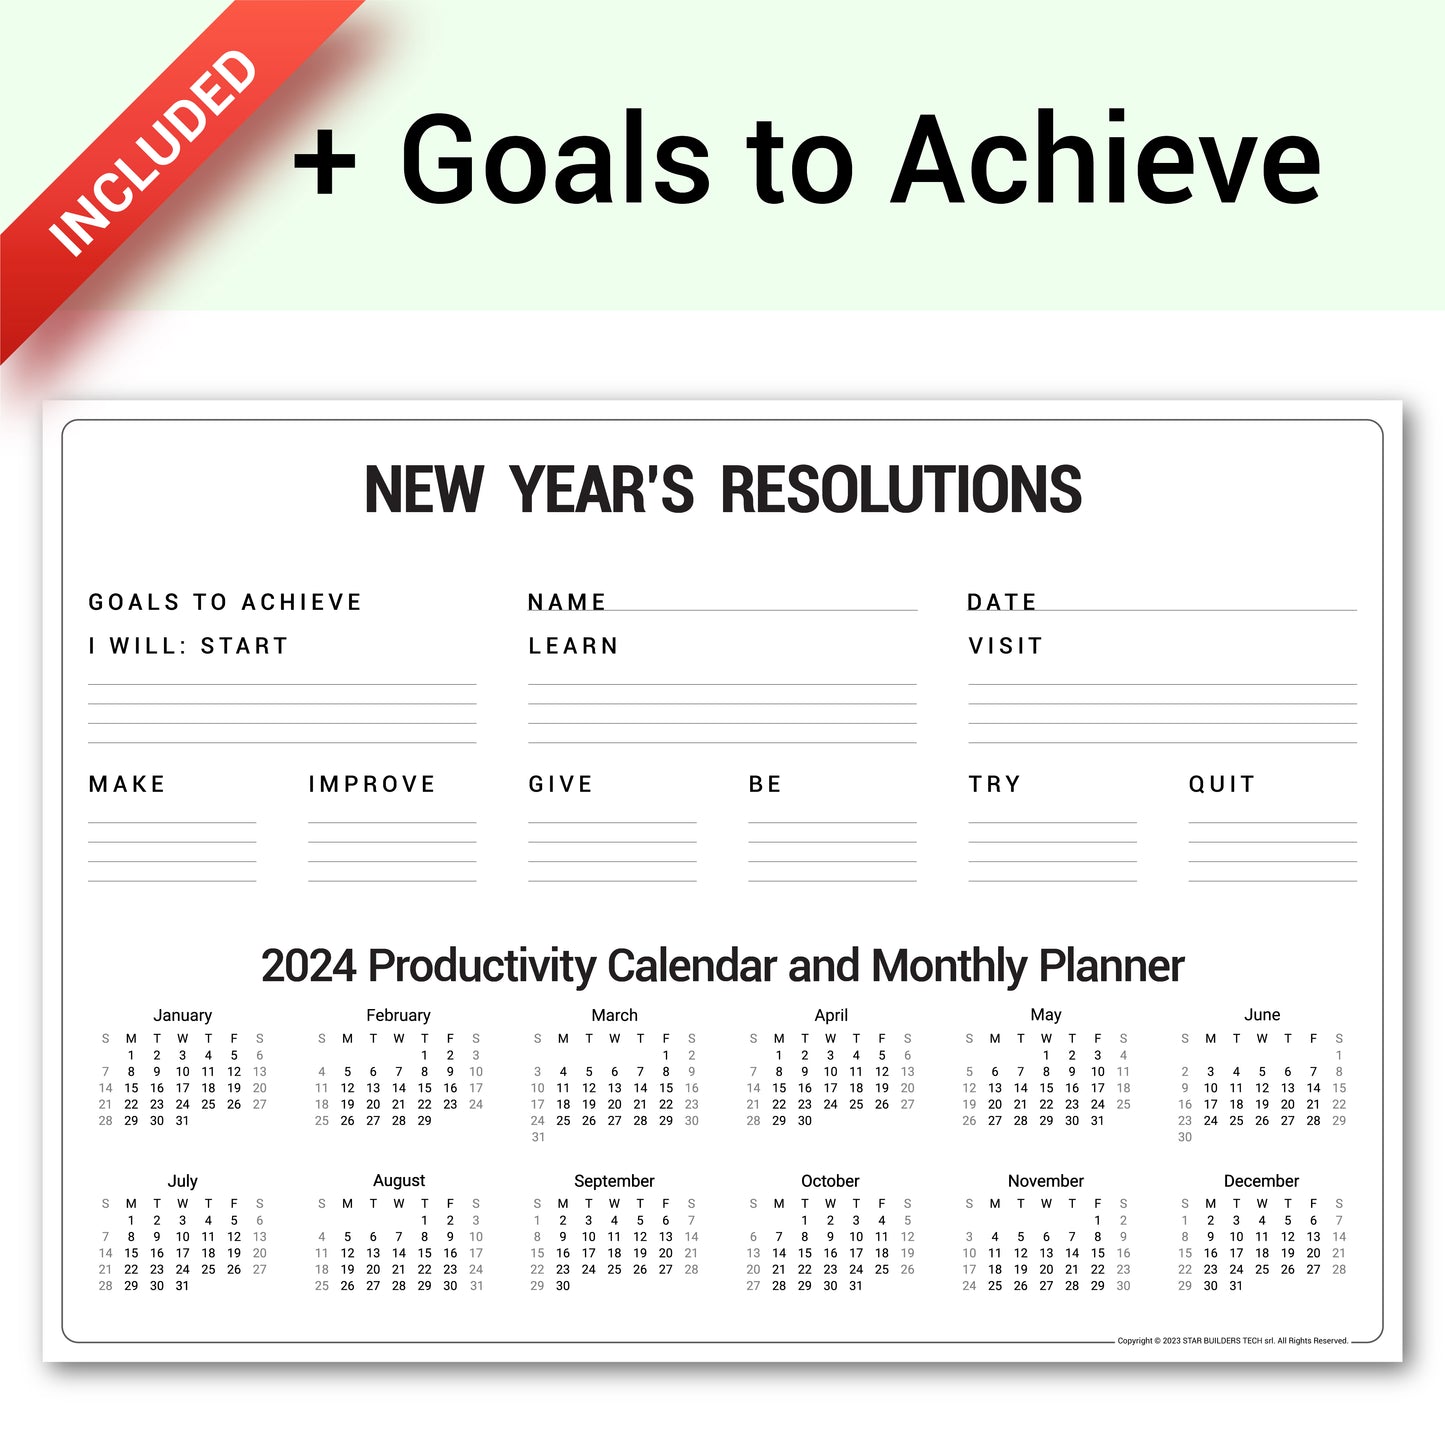 New Year Resolutions and 2024 Calendar